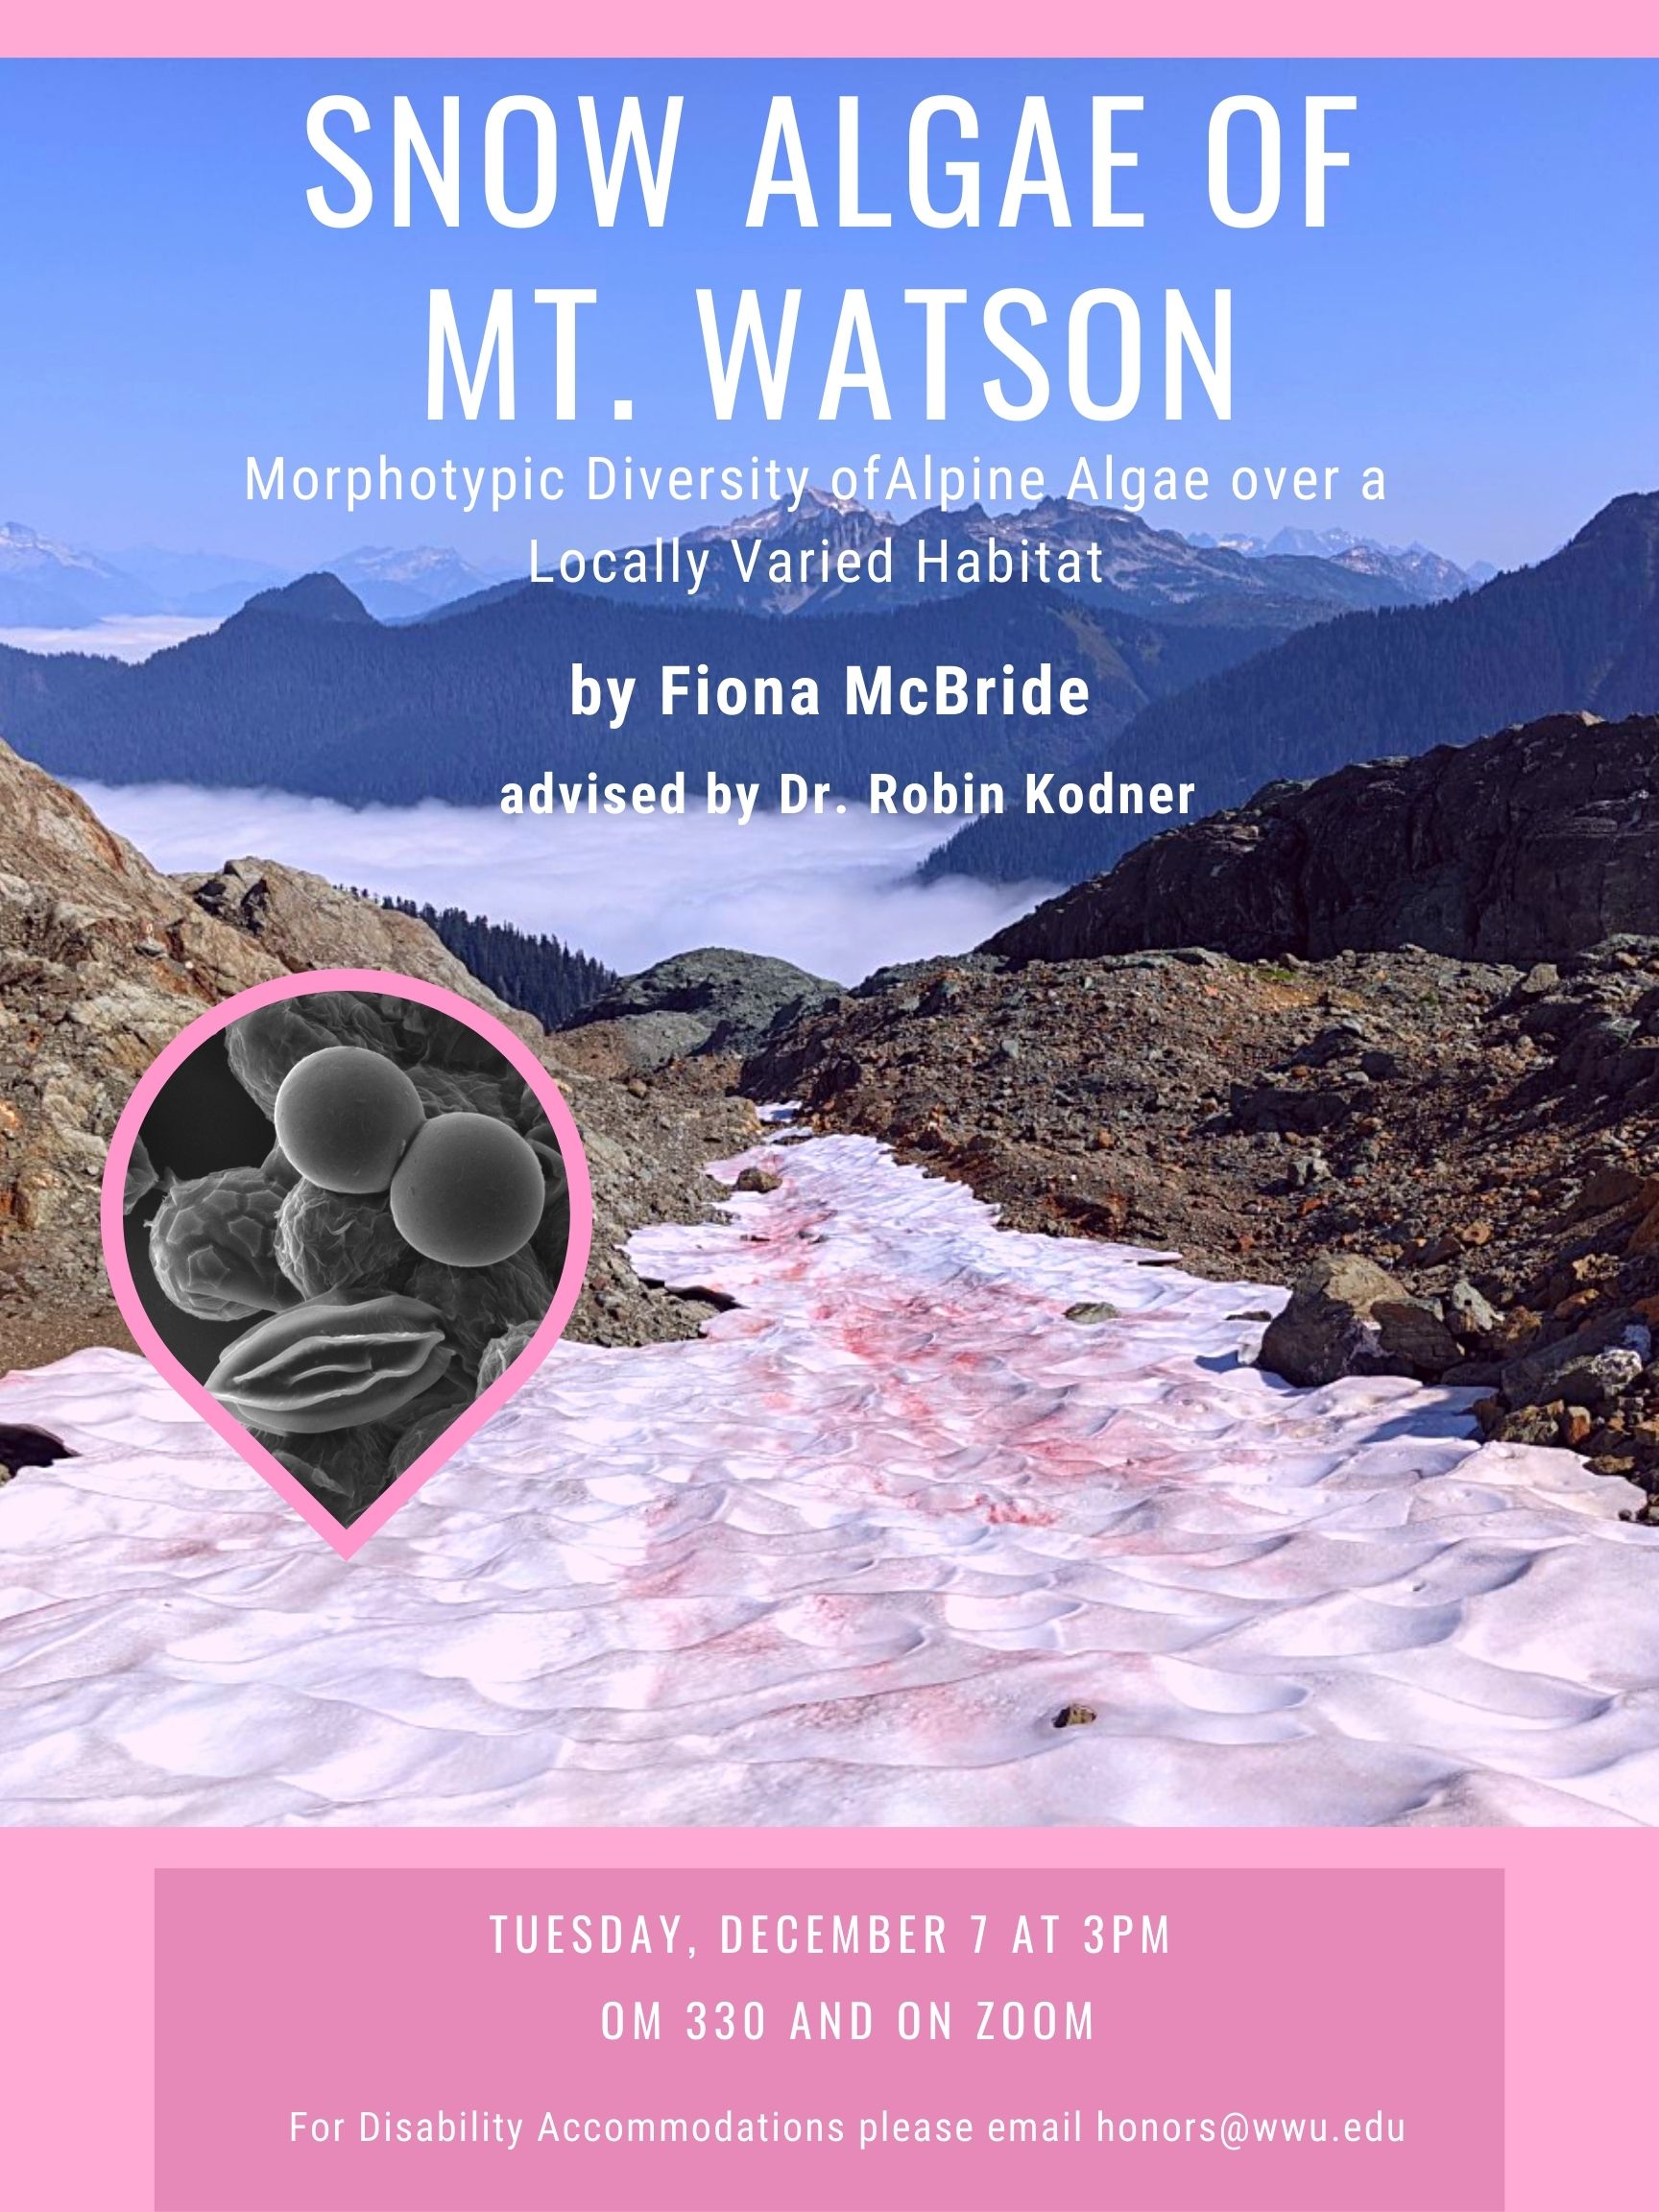 A poster with a photo of a mountain with snow that has algae on it. The text reads "Snow algae of Mt. Watson. Morphotypic Diversity of Alpine Algae over a Locally Varied Habitat. By Fiona McBride, advised by Dr. Robin Kodner. Tuesday December 7 at 3PM at OM 330 and on zoom. For disability accommodations please email honors@wwu.edu."